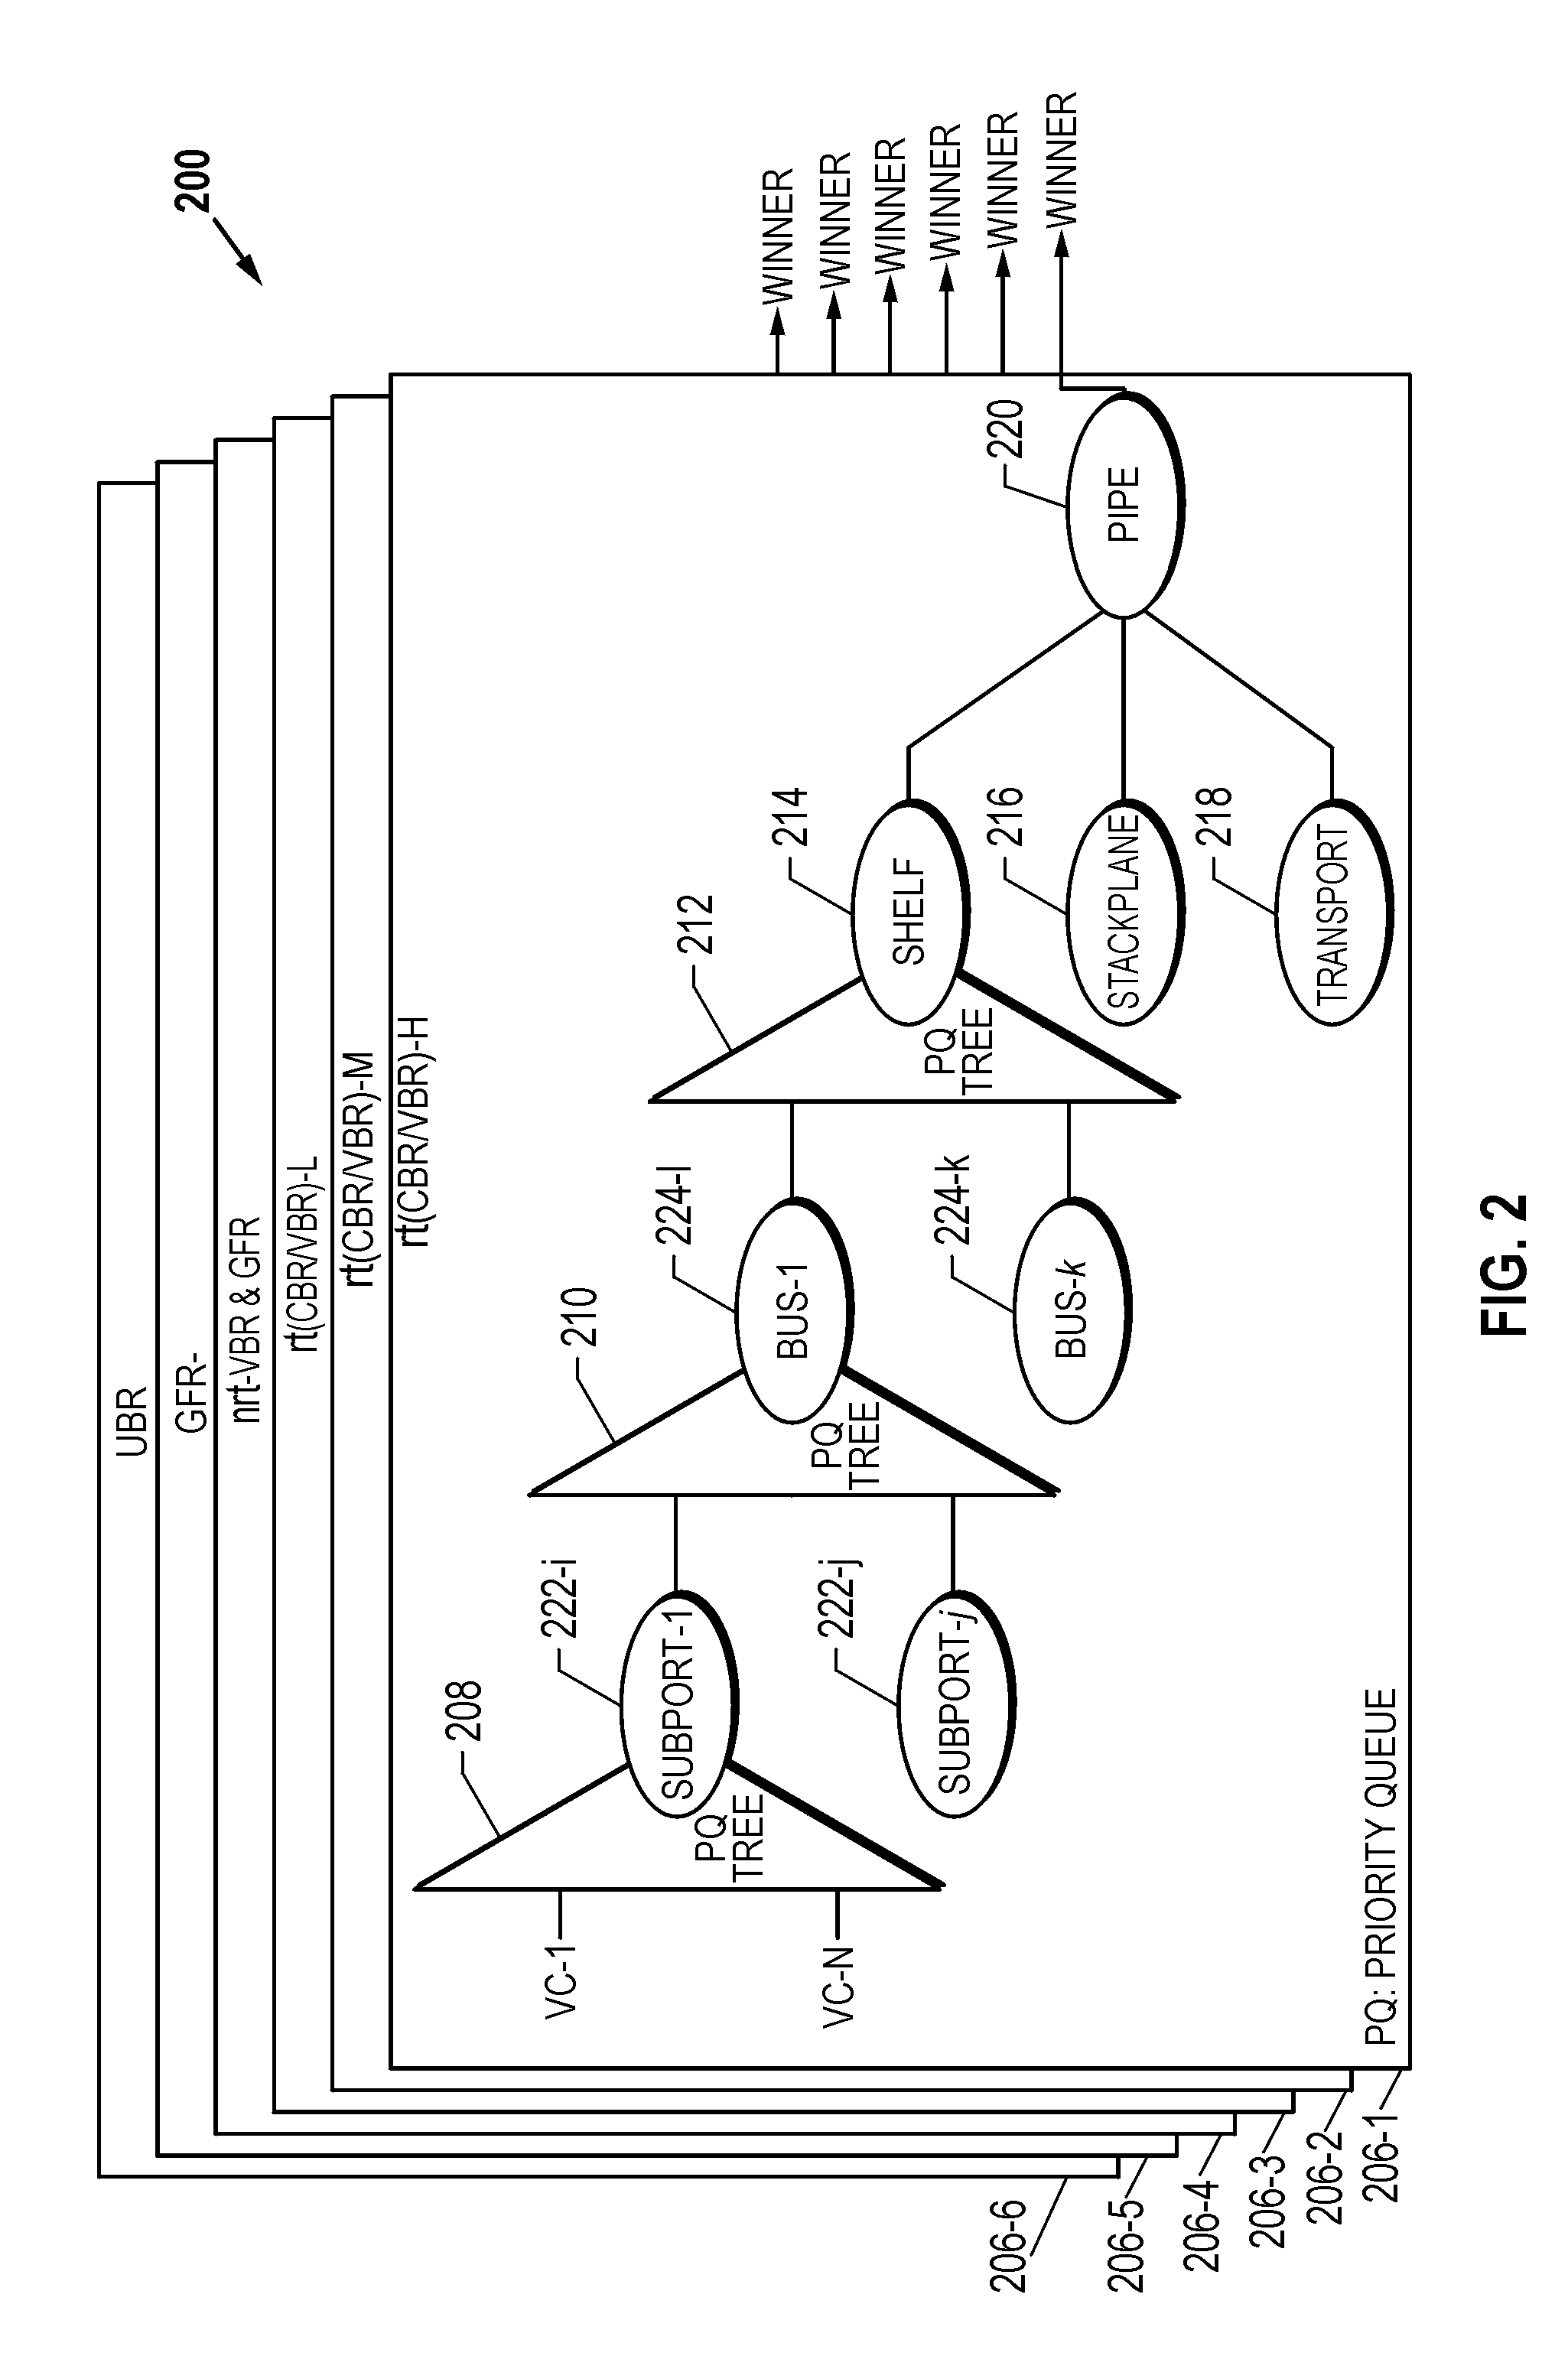 Calendar heap system and method for efficient sorting